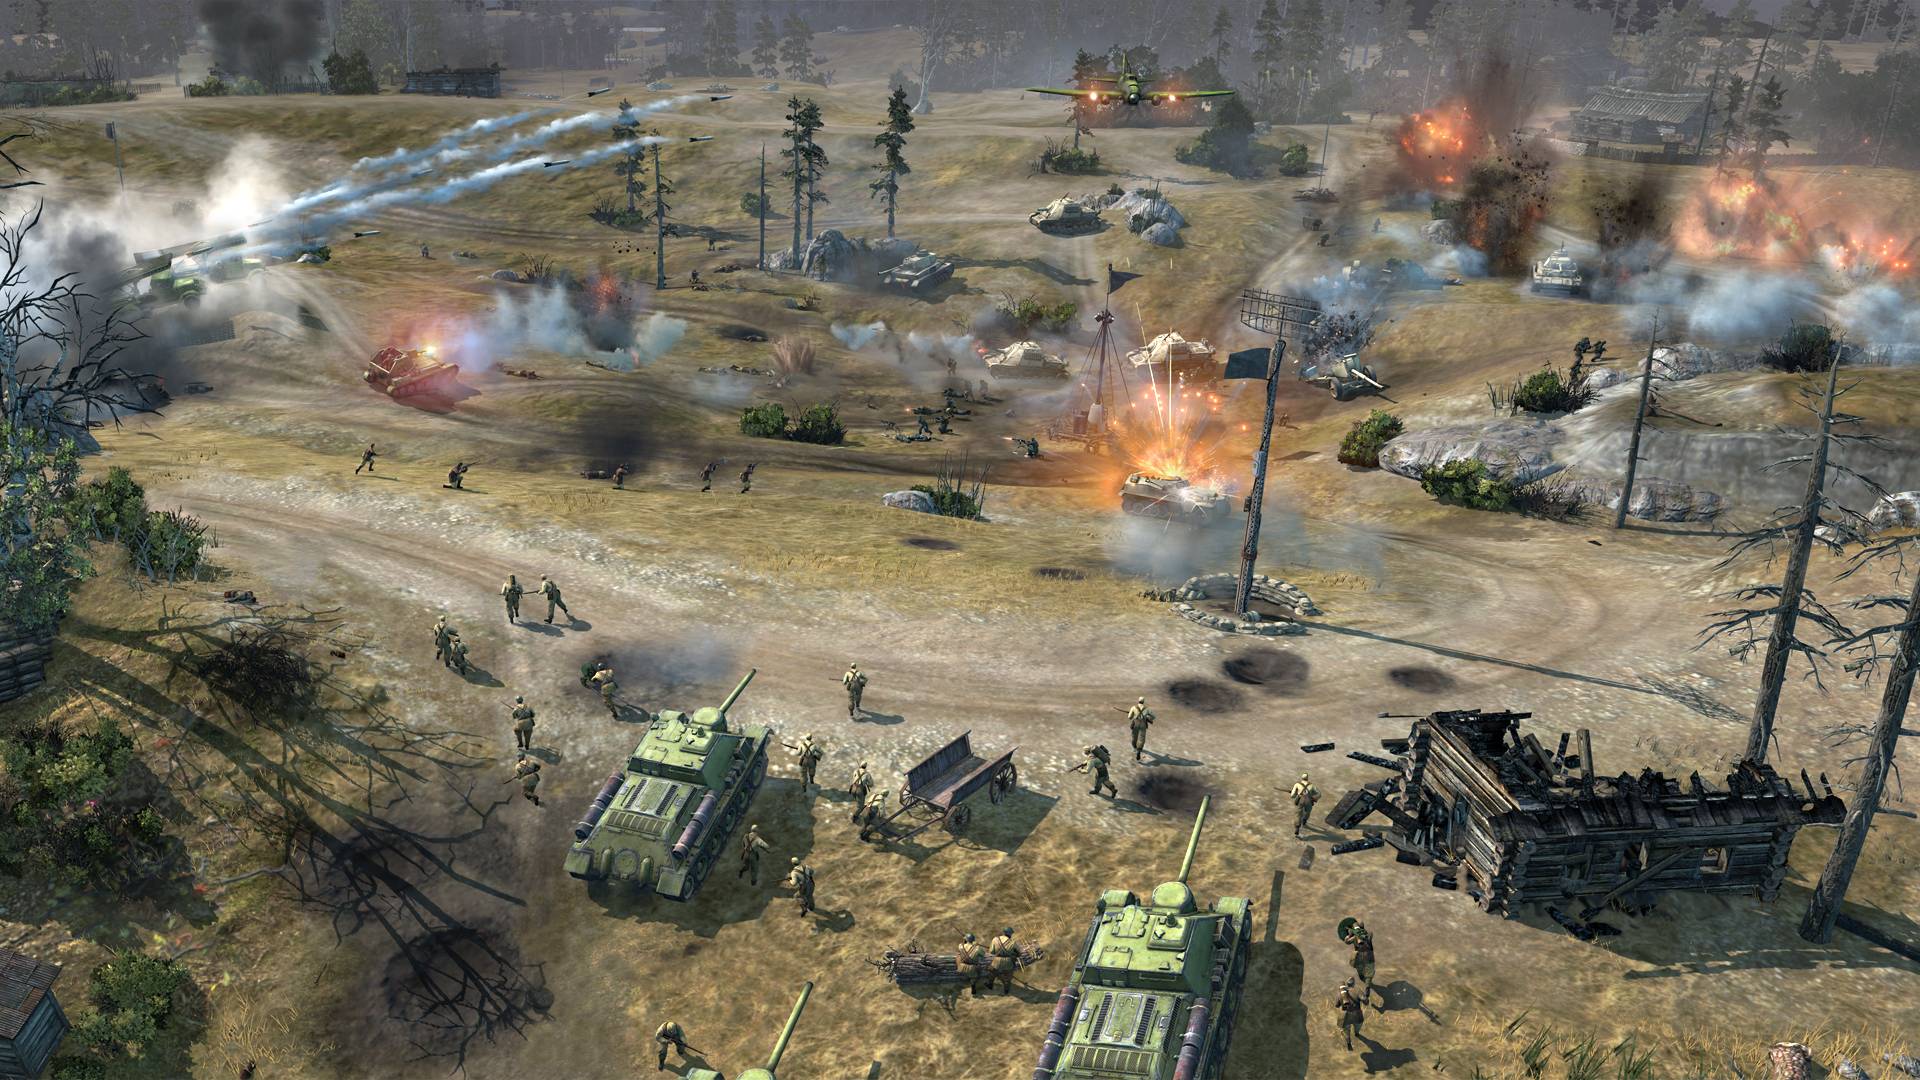 Company of Heroes 2 interview with game director Quinn Duffy